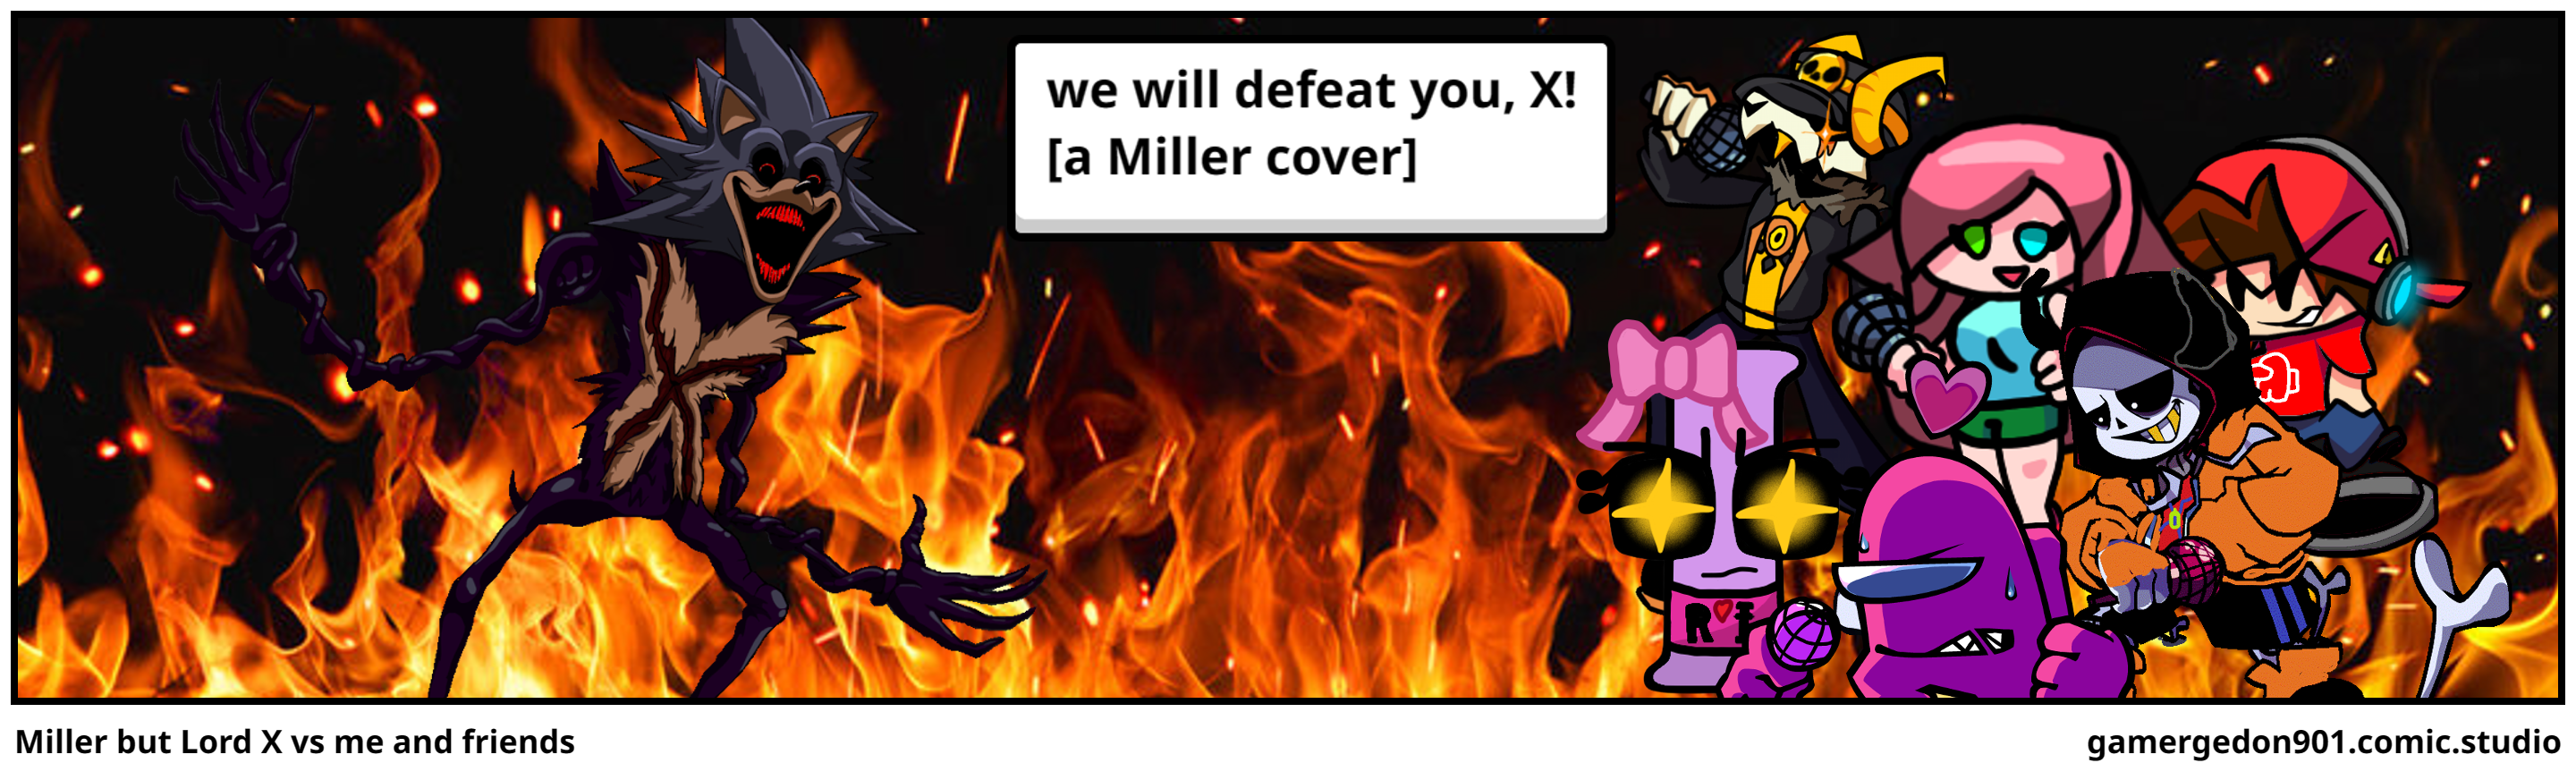 Miller but Lord X vs me and friends